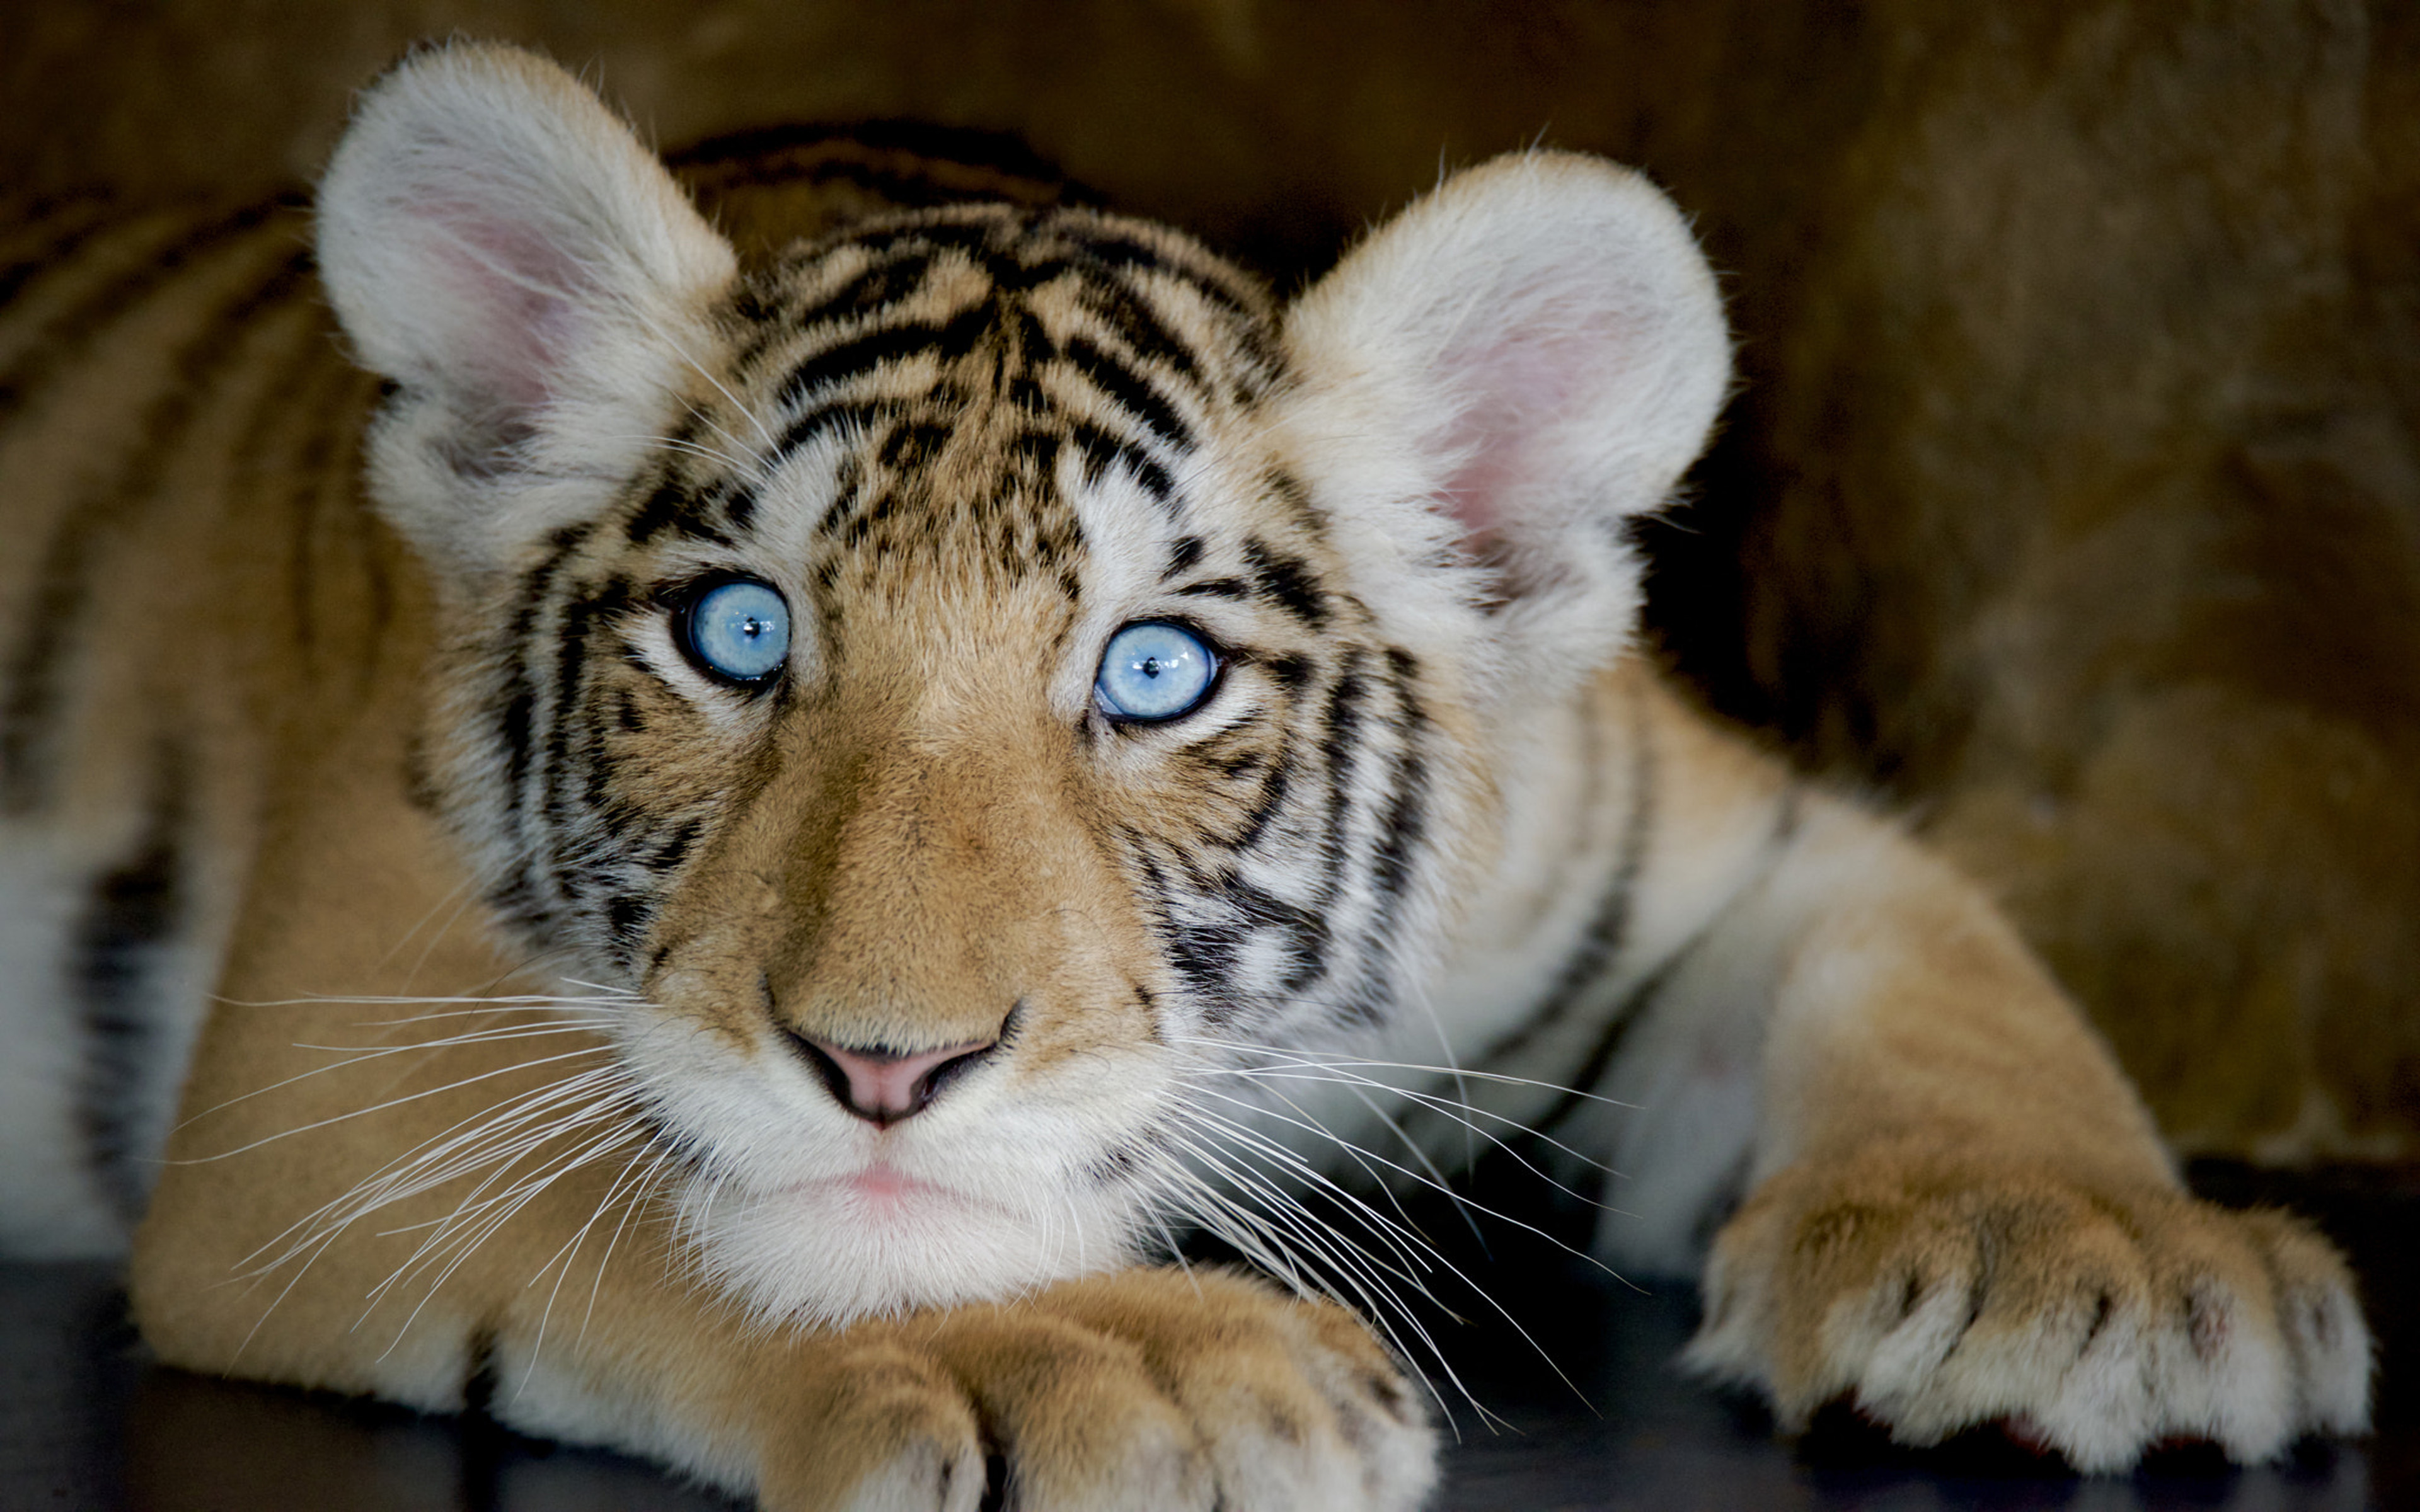 Animals Tiger Boy With Blue Eyes Desktop Hd Wallpaper For Pc Tablet And  Mobile Download 3840x2400 : 